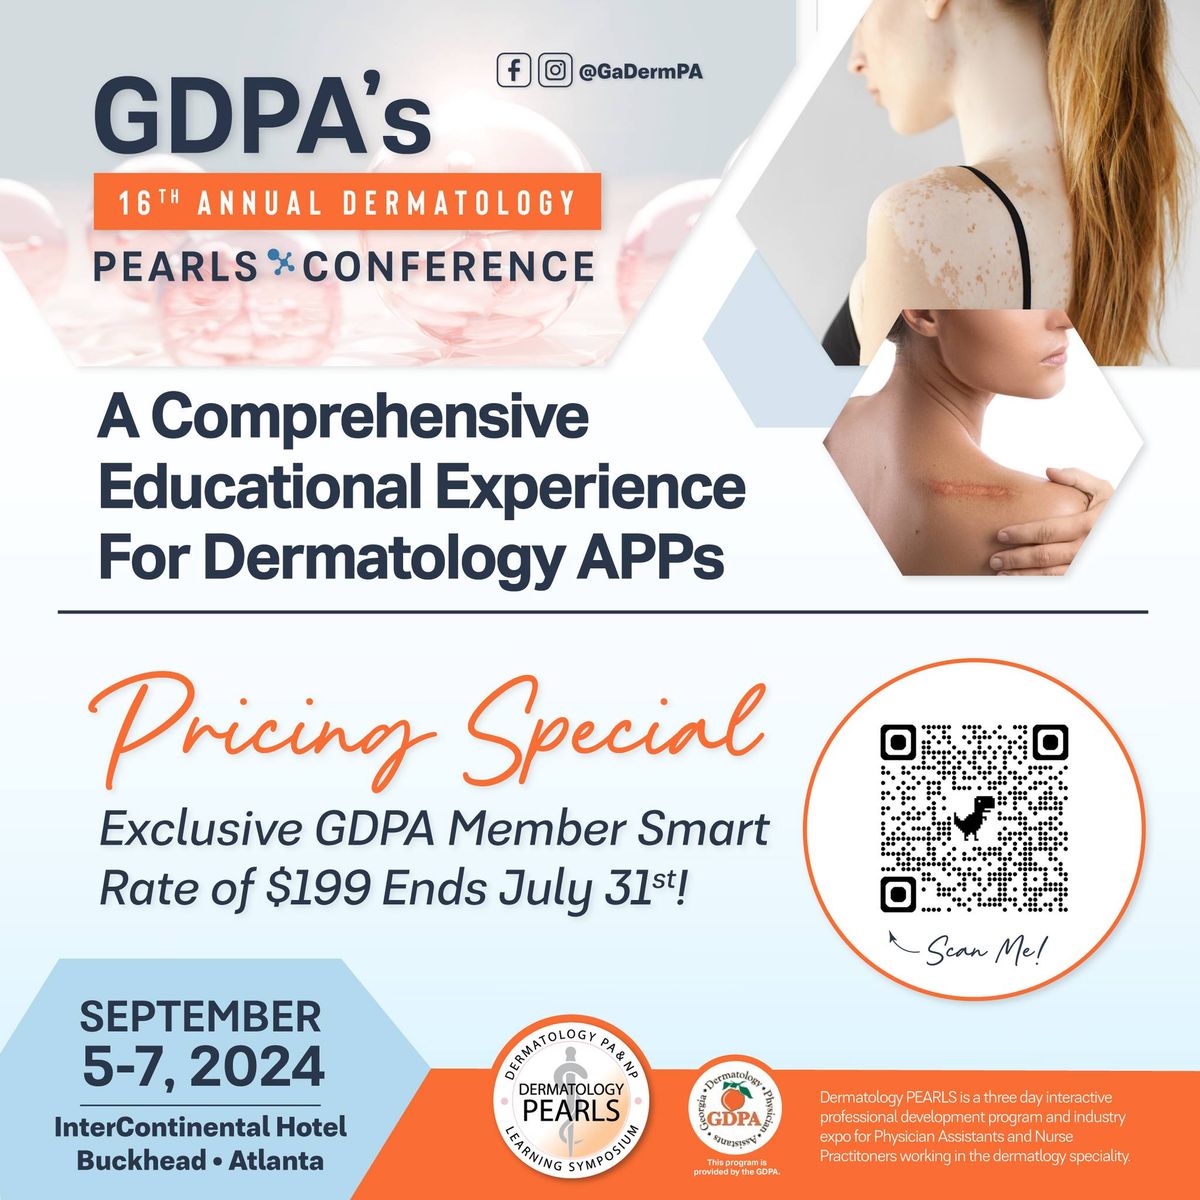 GDPA's 16th Annual Dermatology PEARLS Conference